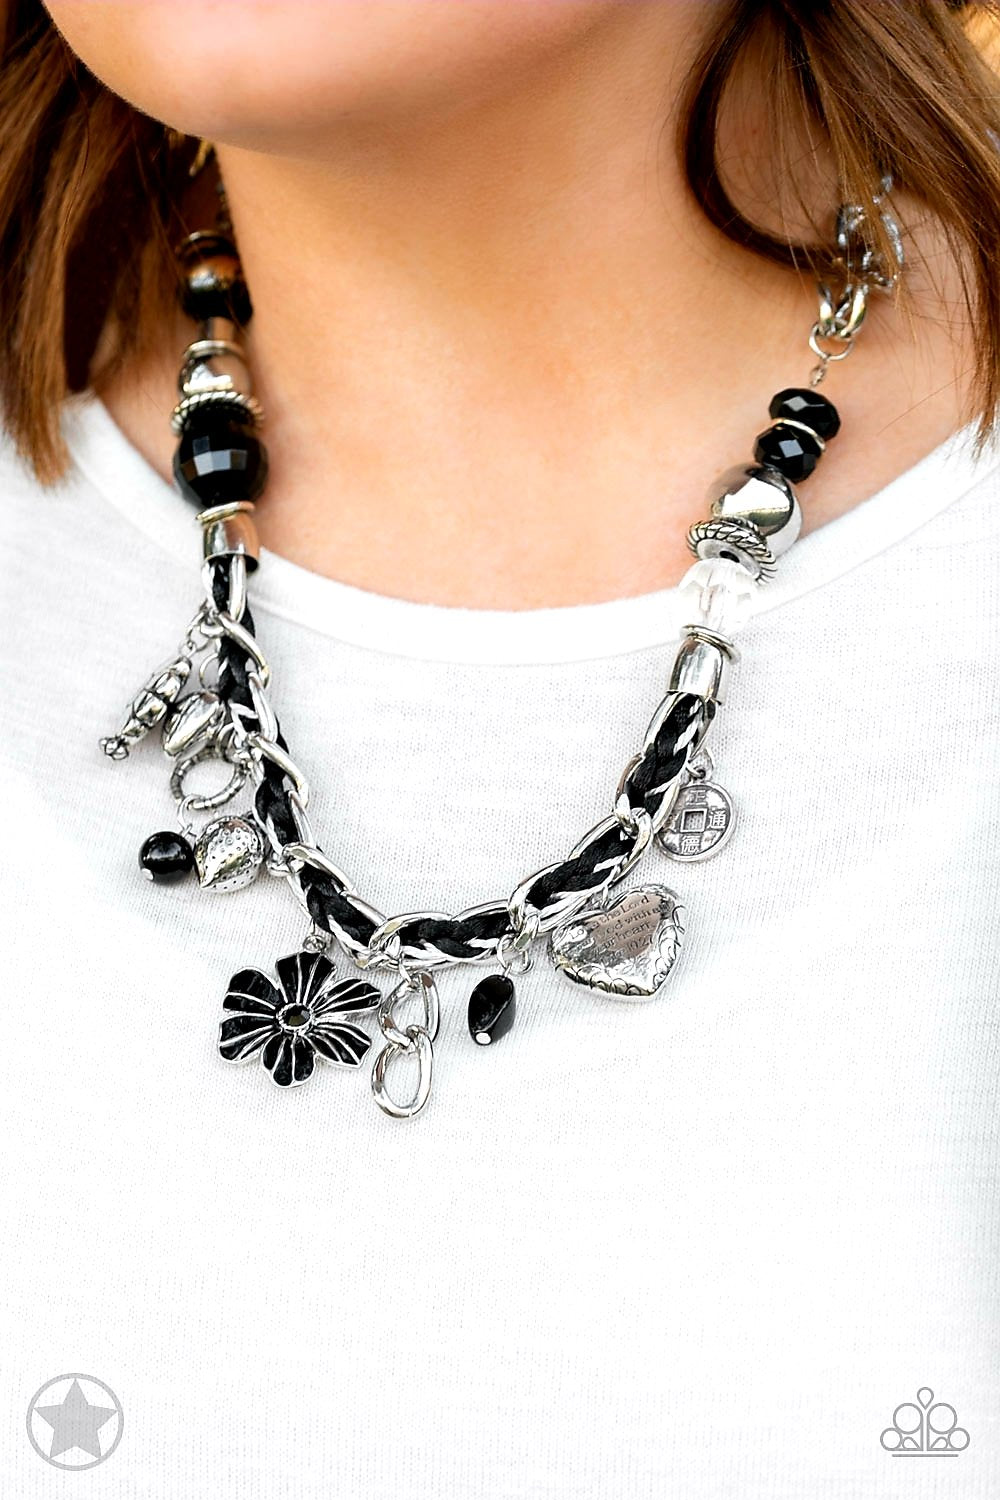 Charmed, I Am Sure Black Necklace - Paparazzi Accessories - Black and ivory cording is braided through a chunky silver chain. A unique variety of charms decorate the piece including a delicate flower and a heart. Heart is inscribed with the phrase "With All My Heart"on one side and a short bible verse on the other that reads, "Love the Lord thy God with all your heart. Luke 10:27." Features an adjustable clasp closure.Includes necklace and one pair of matching earrings.